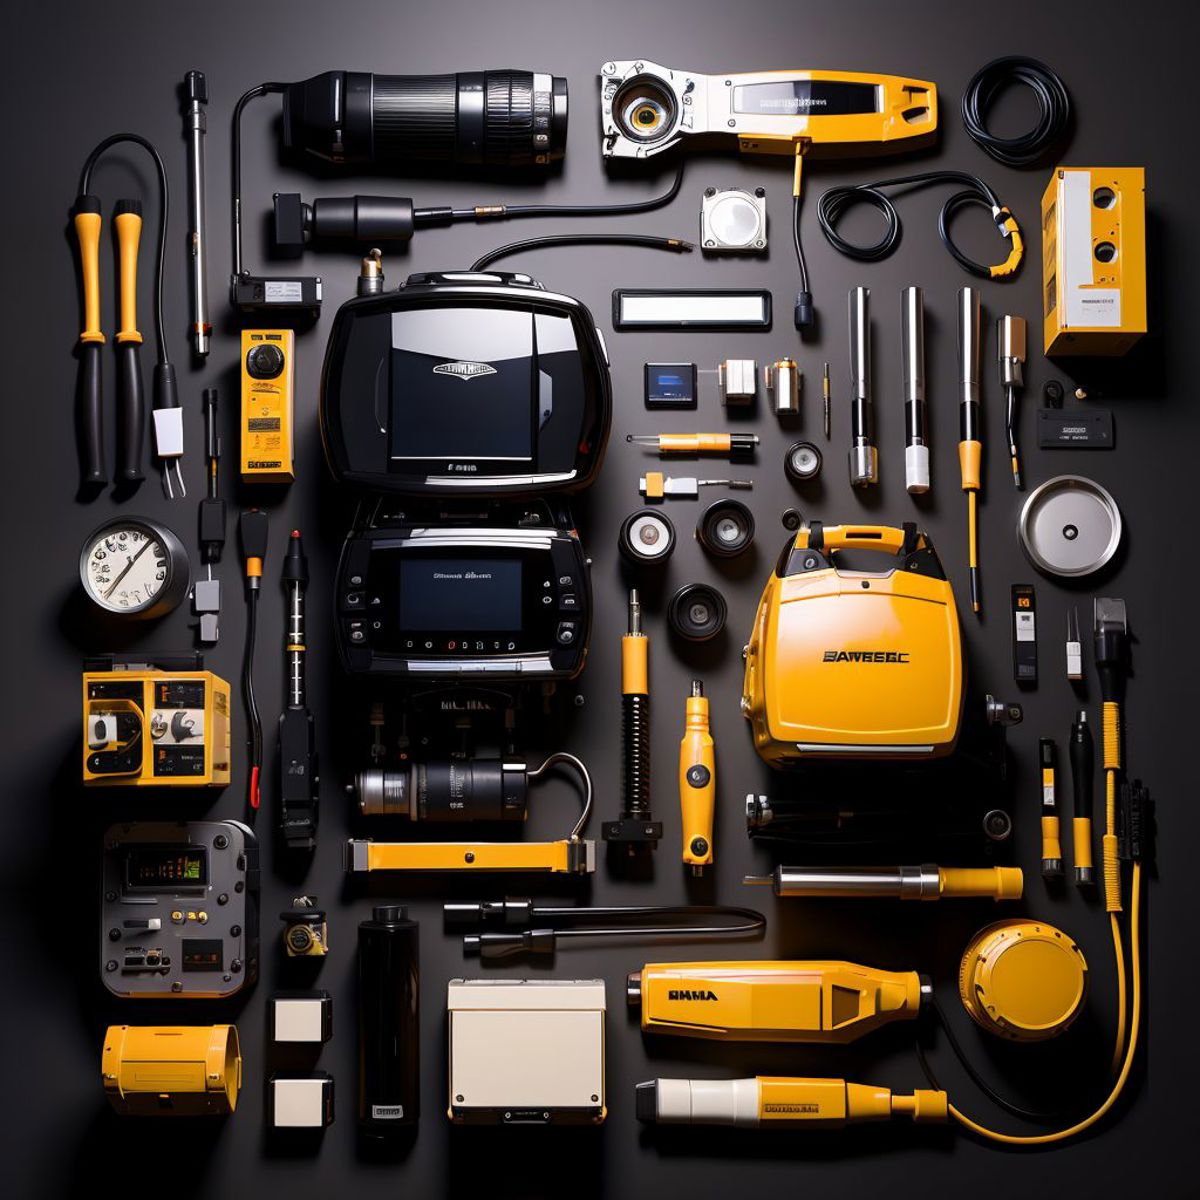 knolling image by dkorbat